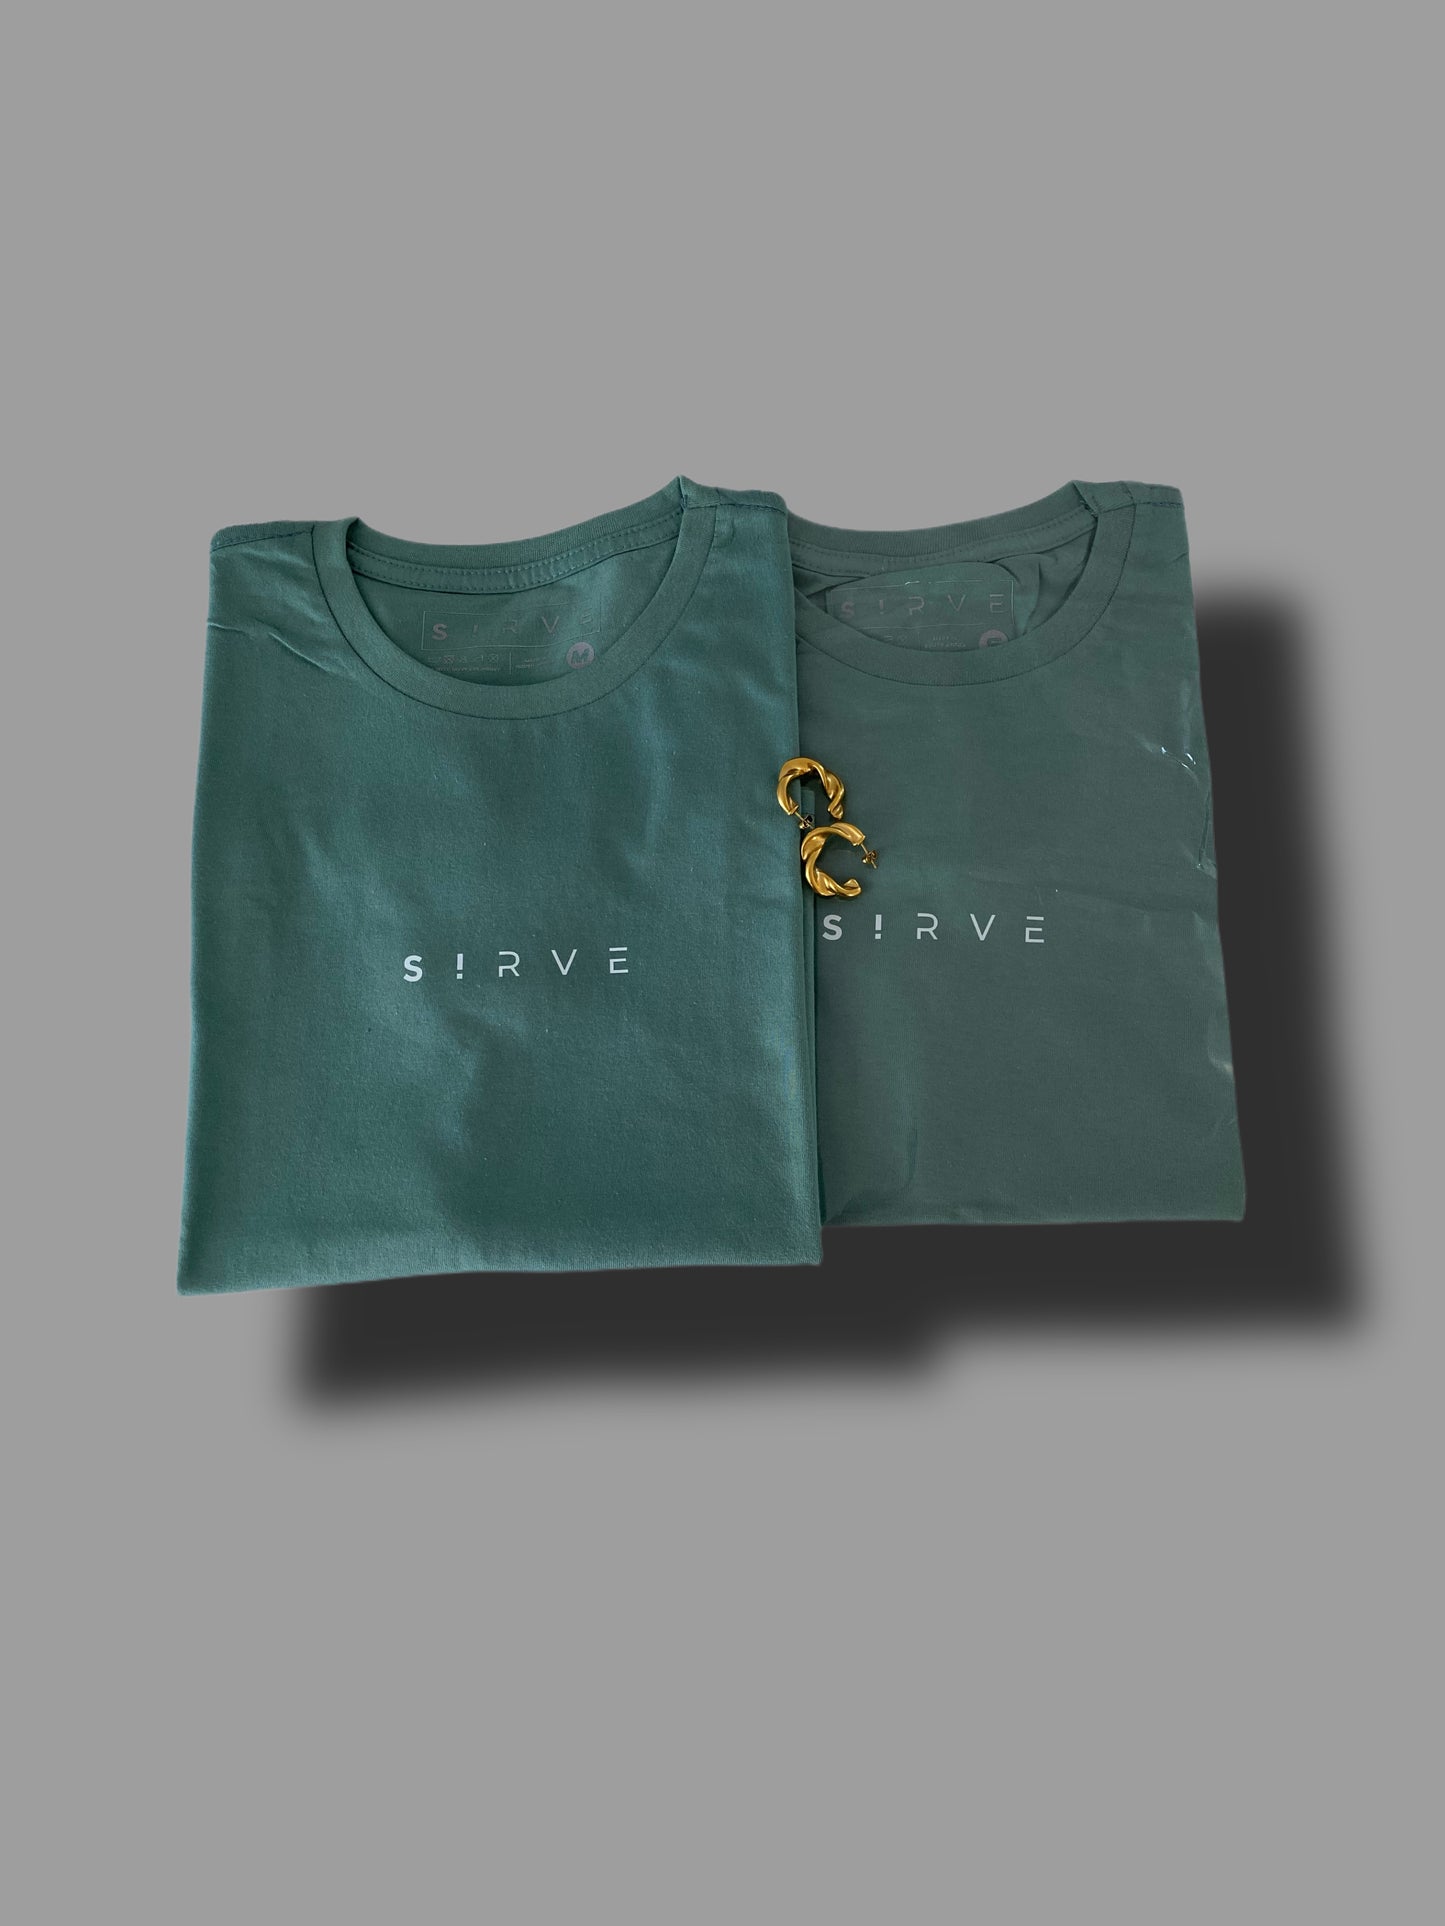 Classic Tee in Sage (Plain back)